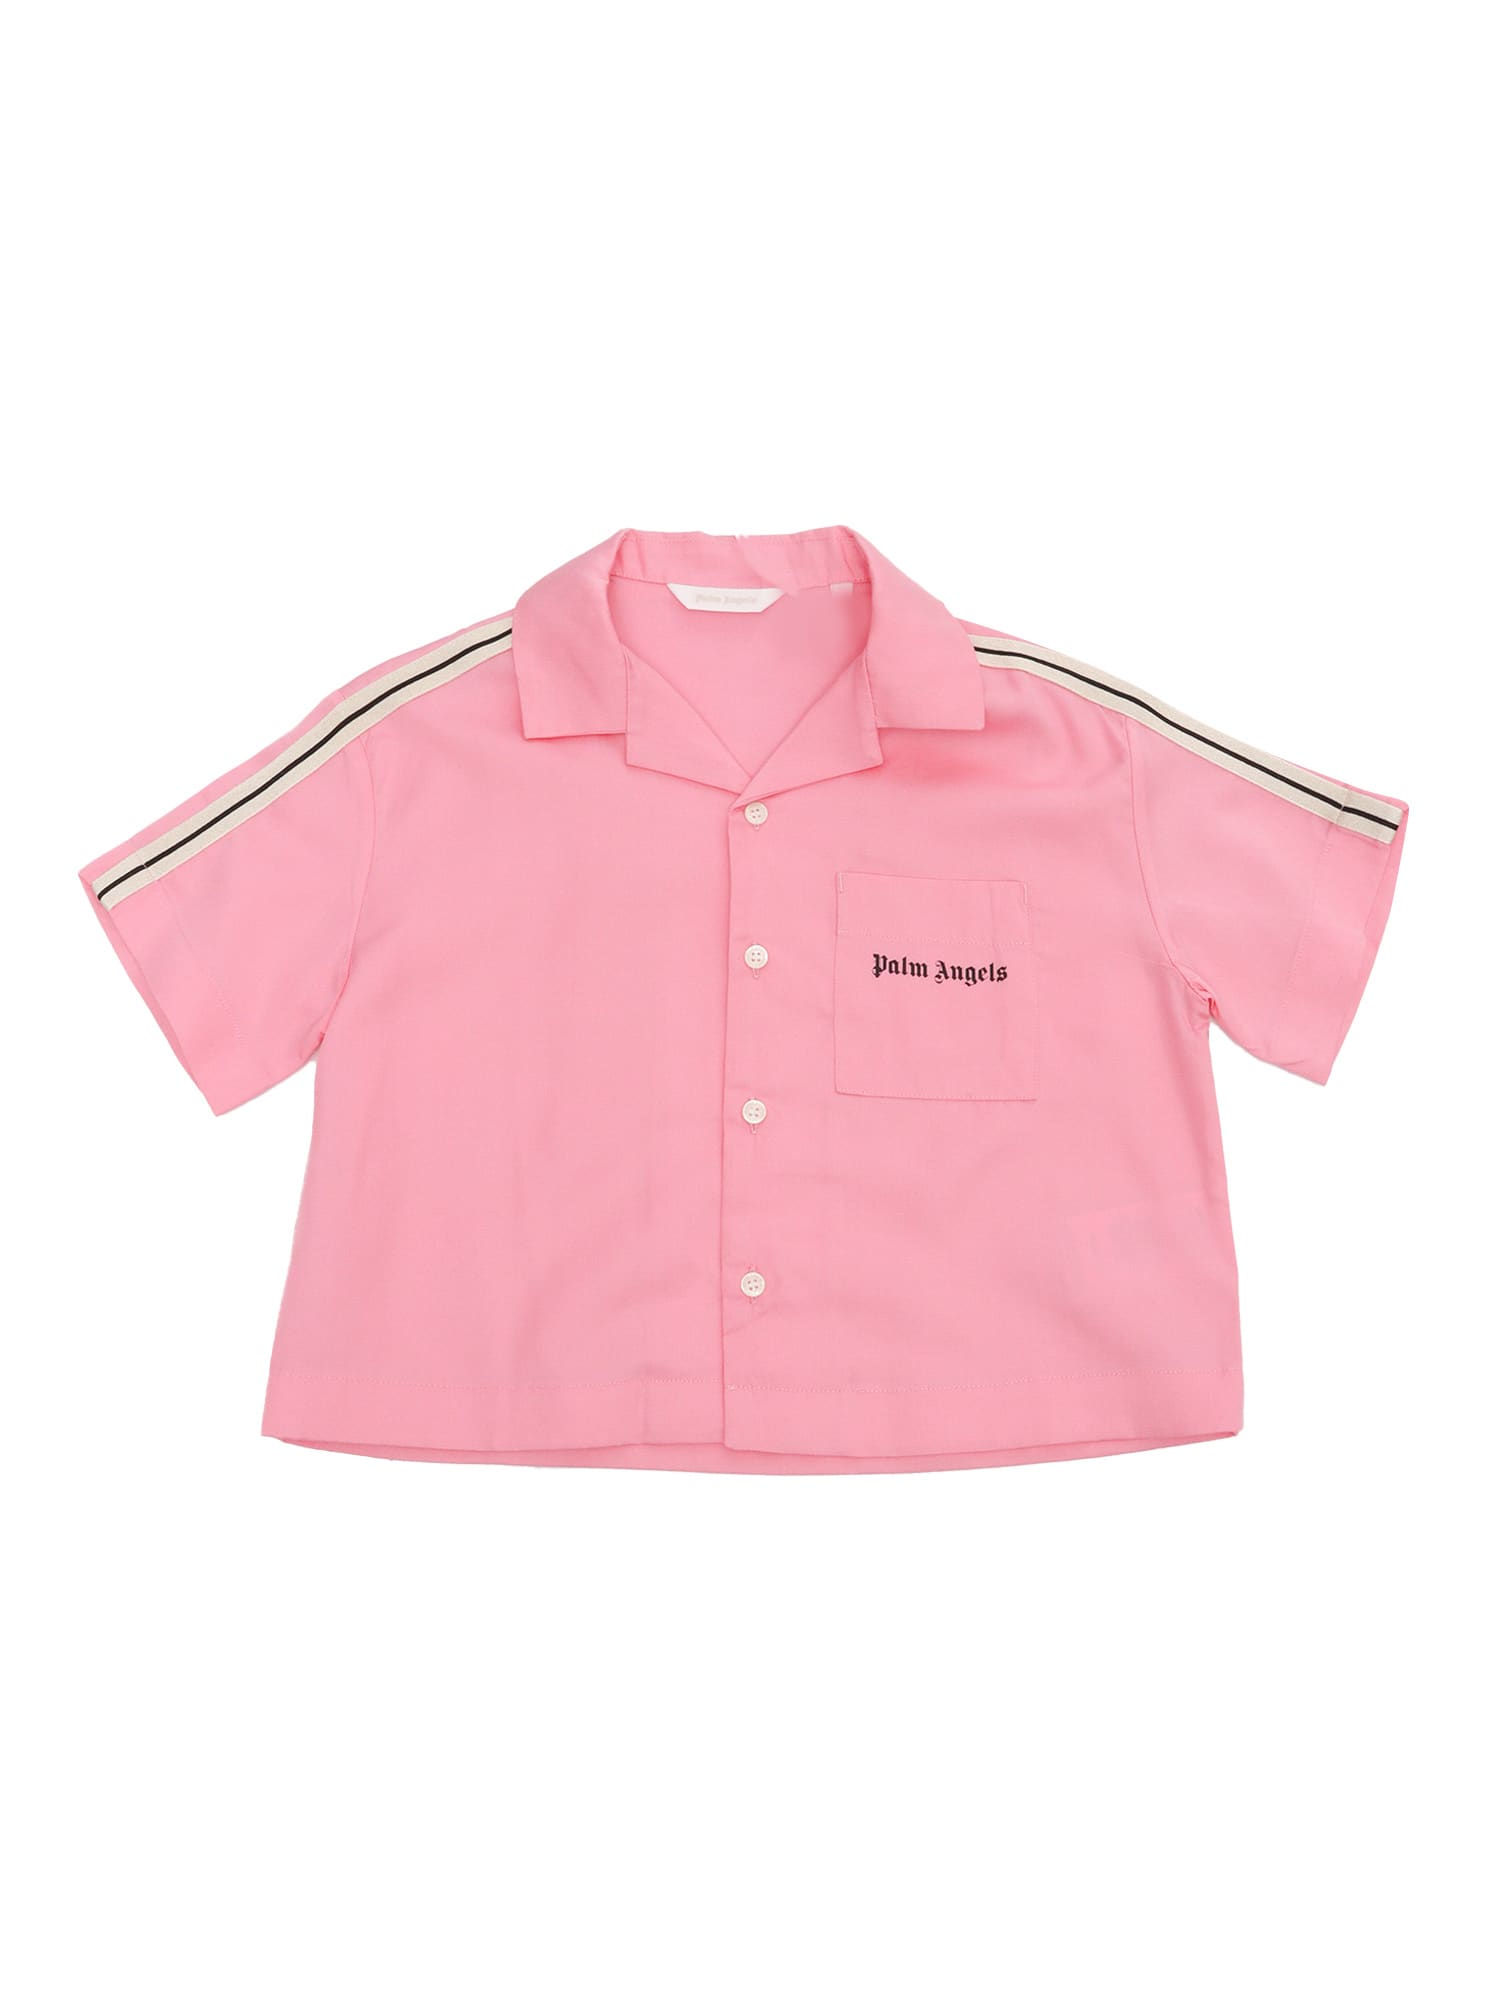 Shop Palm Angels Pink Cropped Shirt